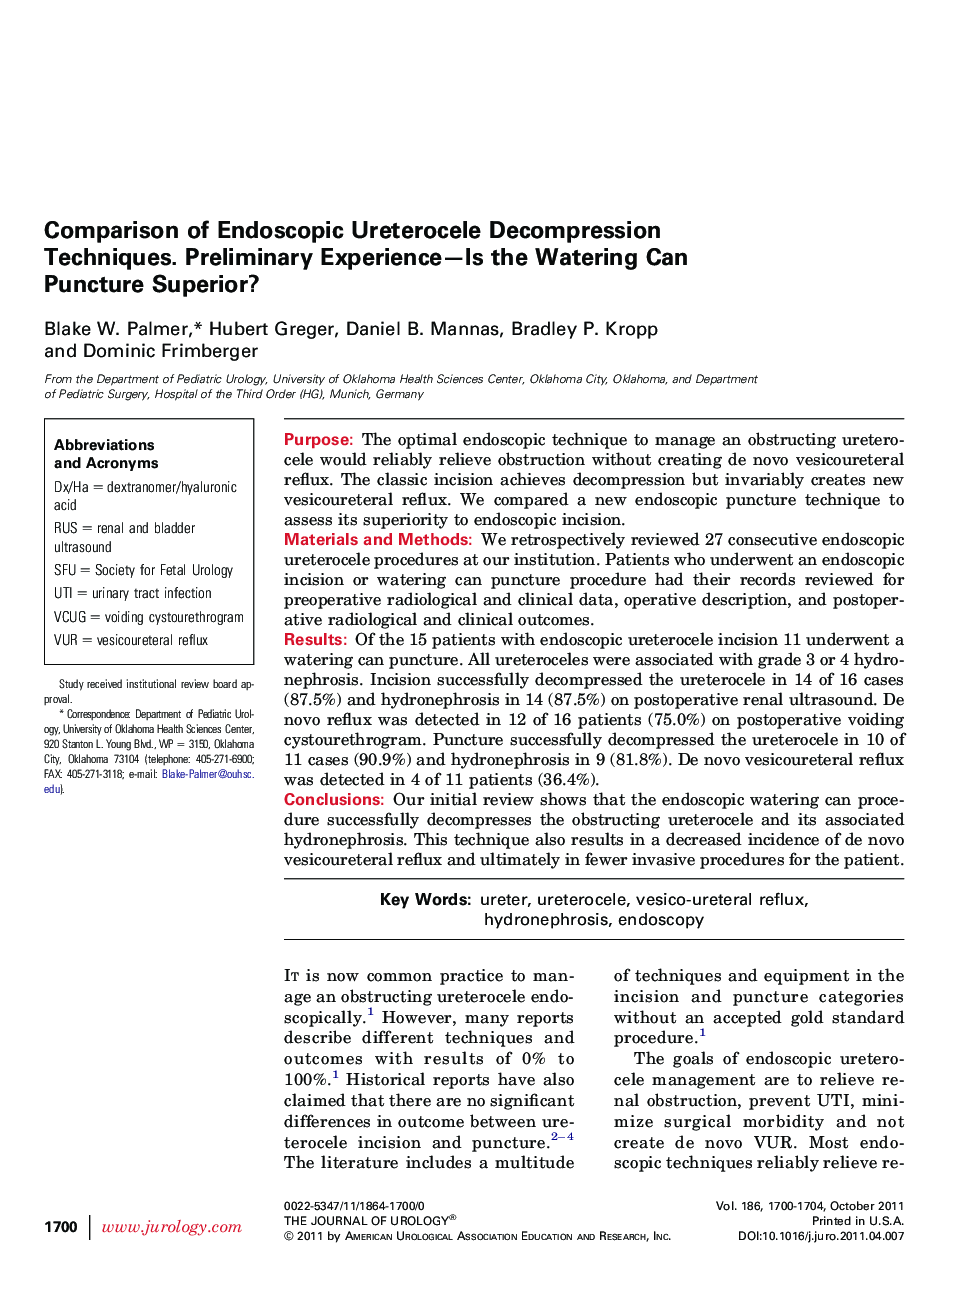 Comparison of Endoscopic Ureterocele Decompression Techniques. Preliminary Experience-Is the Watering Can Puncture Superior?